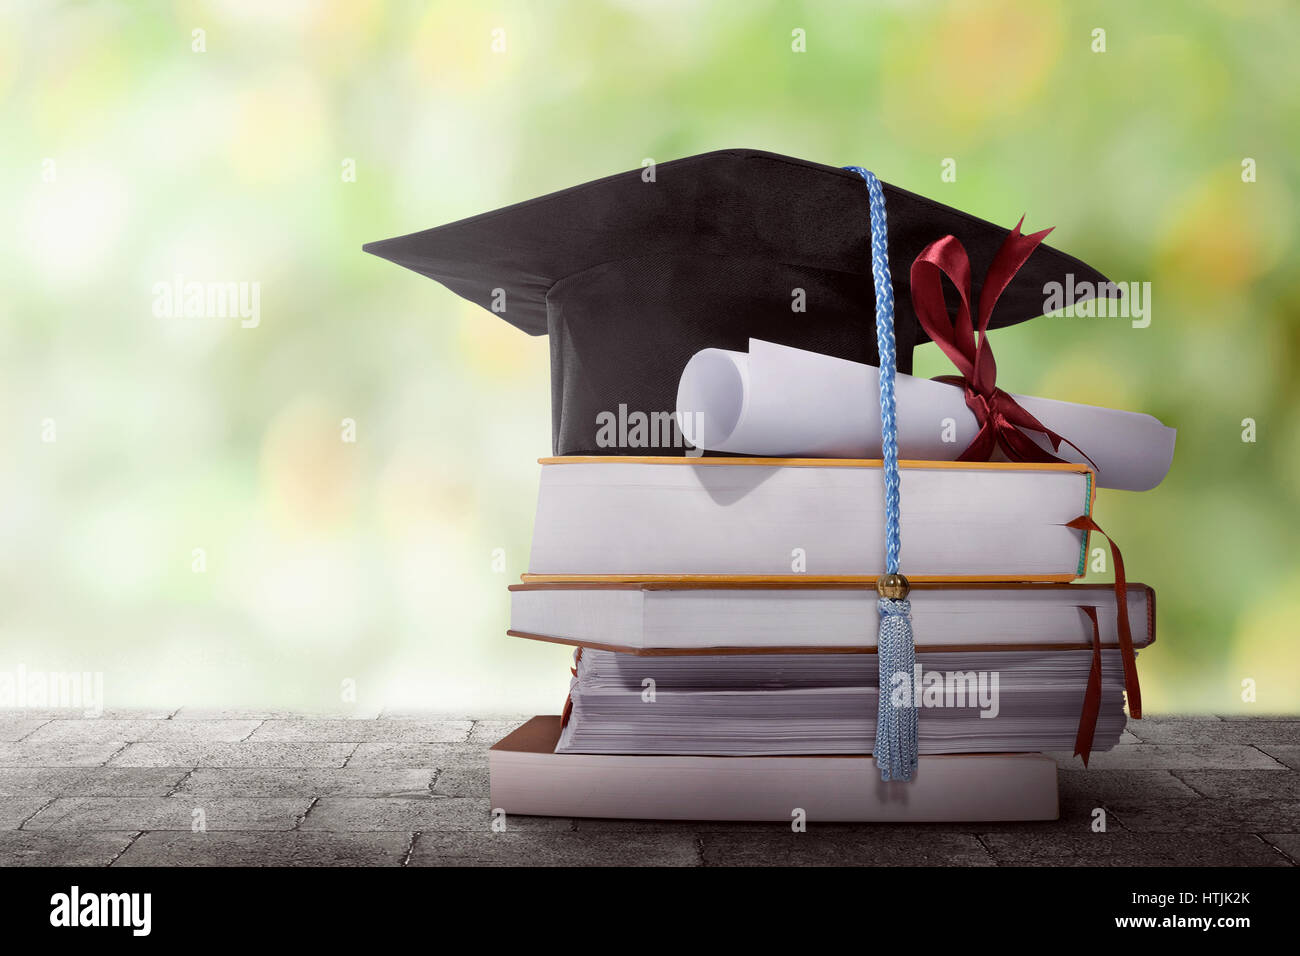 Graduation hat with degree paper on a stack of book against blurred background Stock Photo